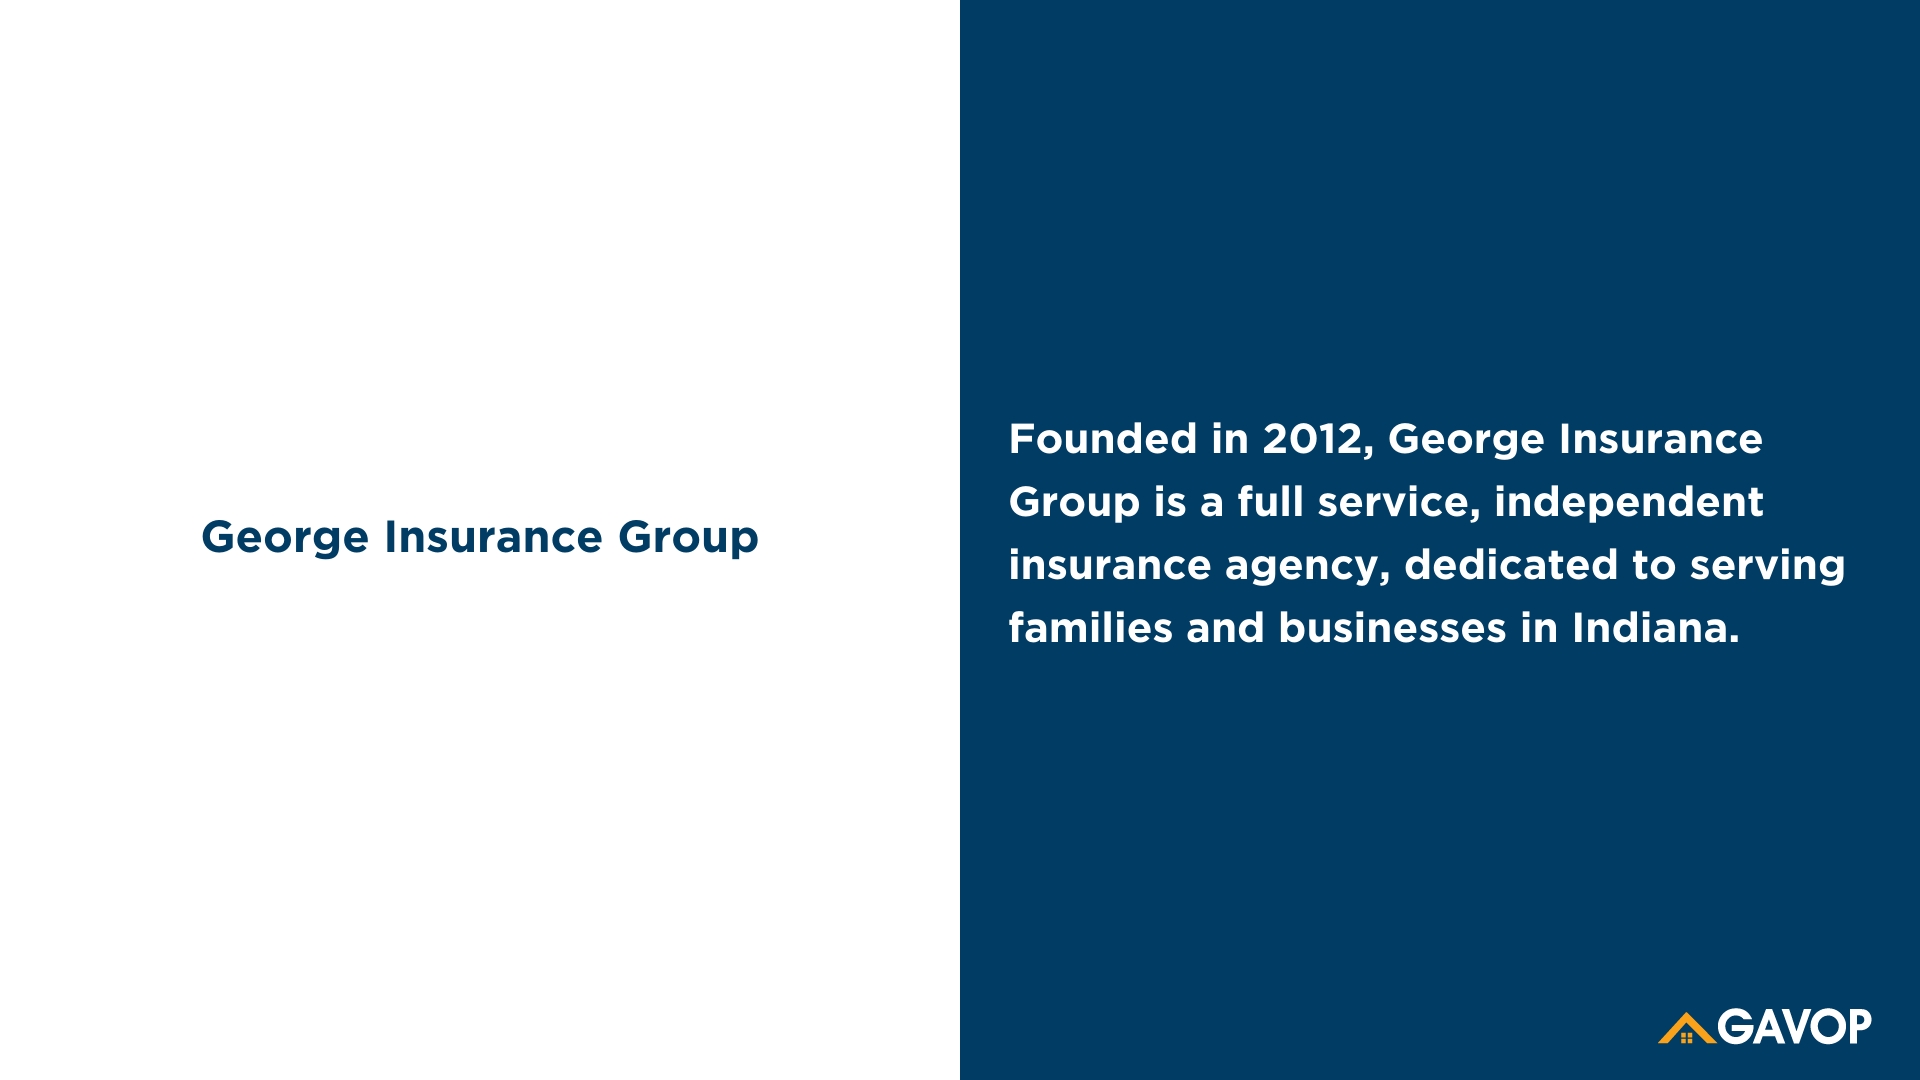 George Insurance Group